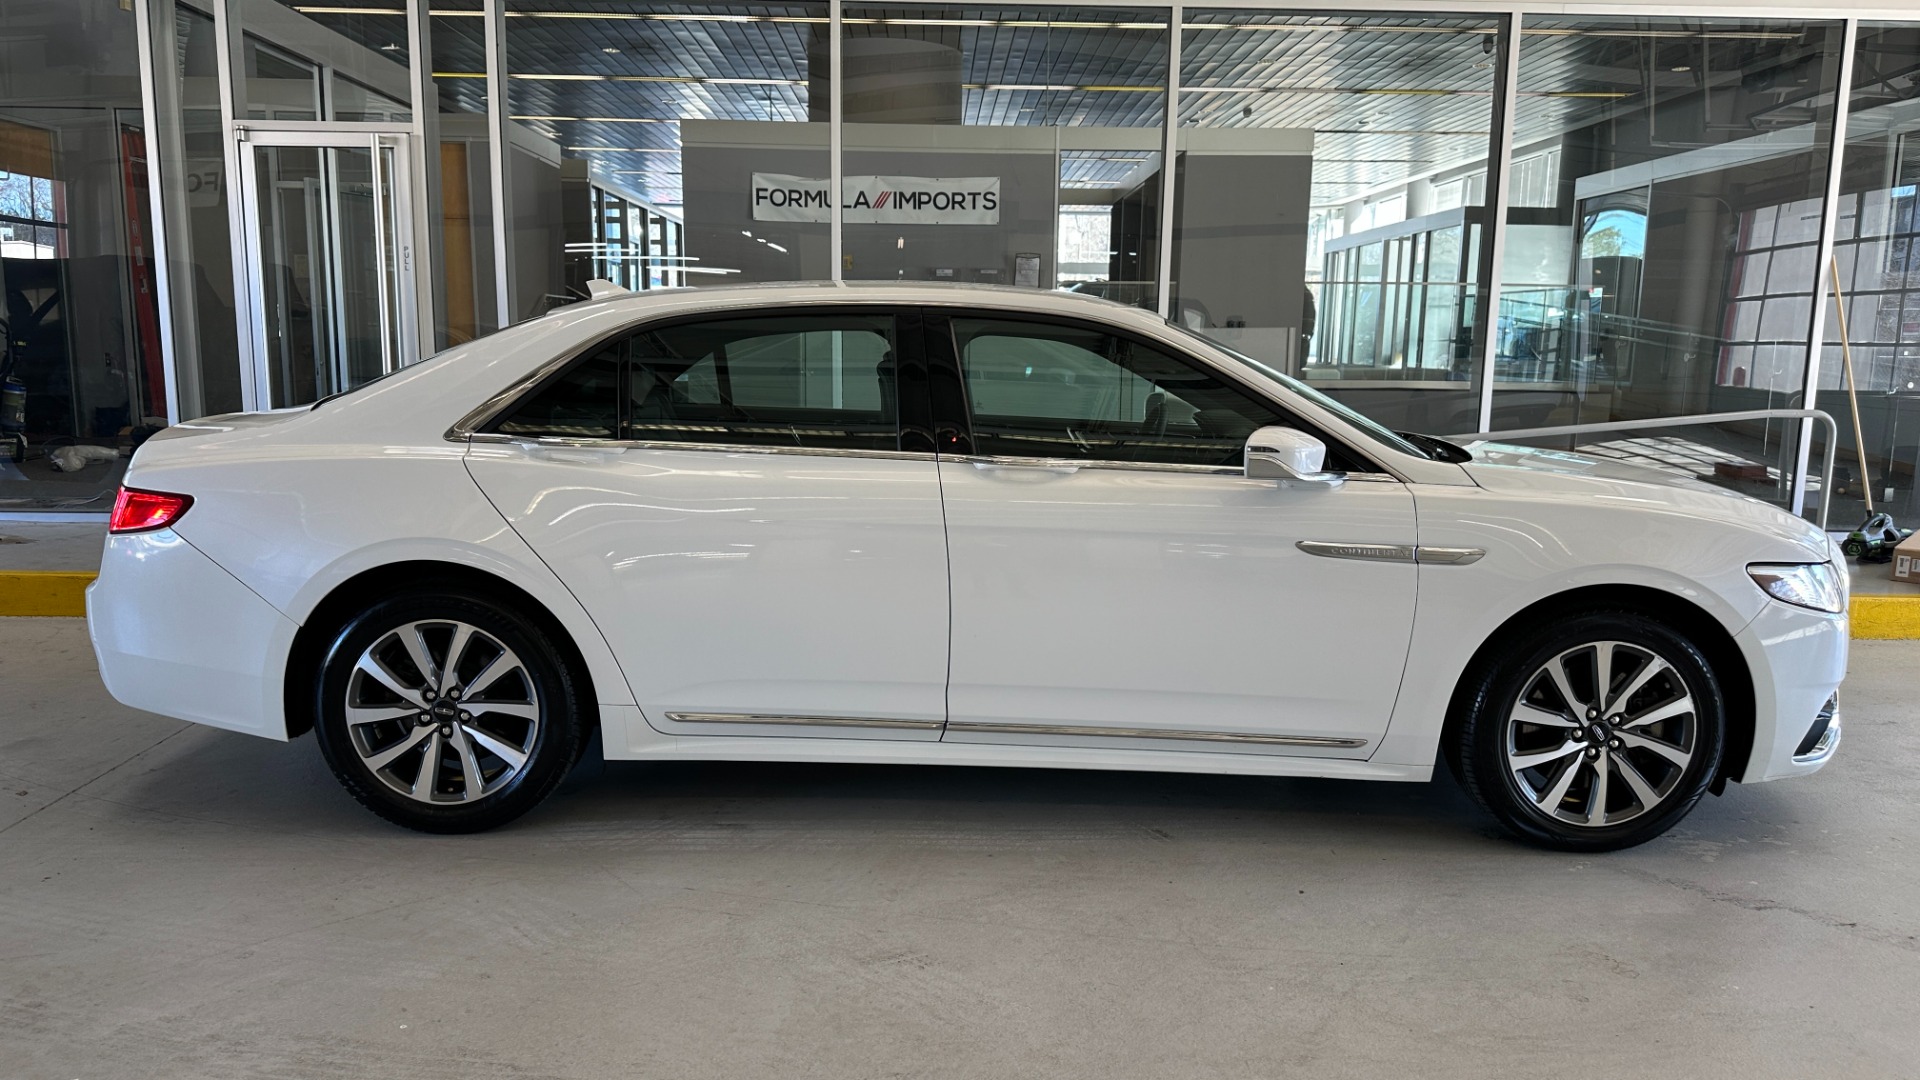 Used 2020 Lincoln Continental STANDARD / LEATHER / HEATED SEATS / BACKUP CAMERA / V6 ENGINE for sale $26,995 at Formula Imports in Charlotte NC 28227 3